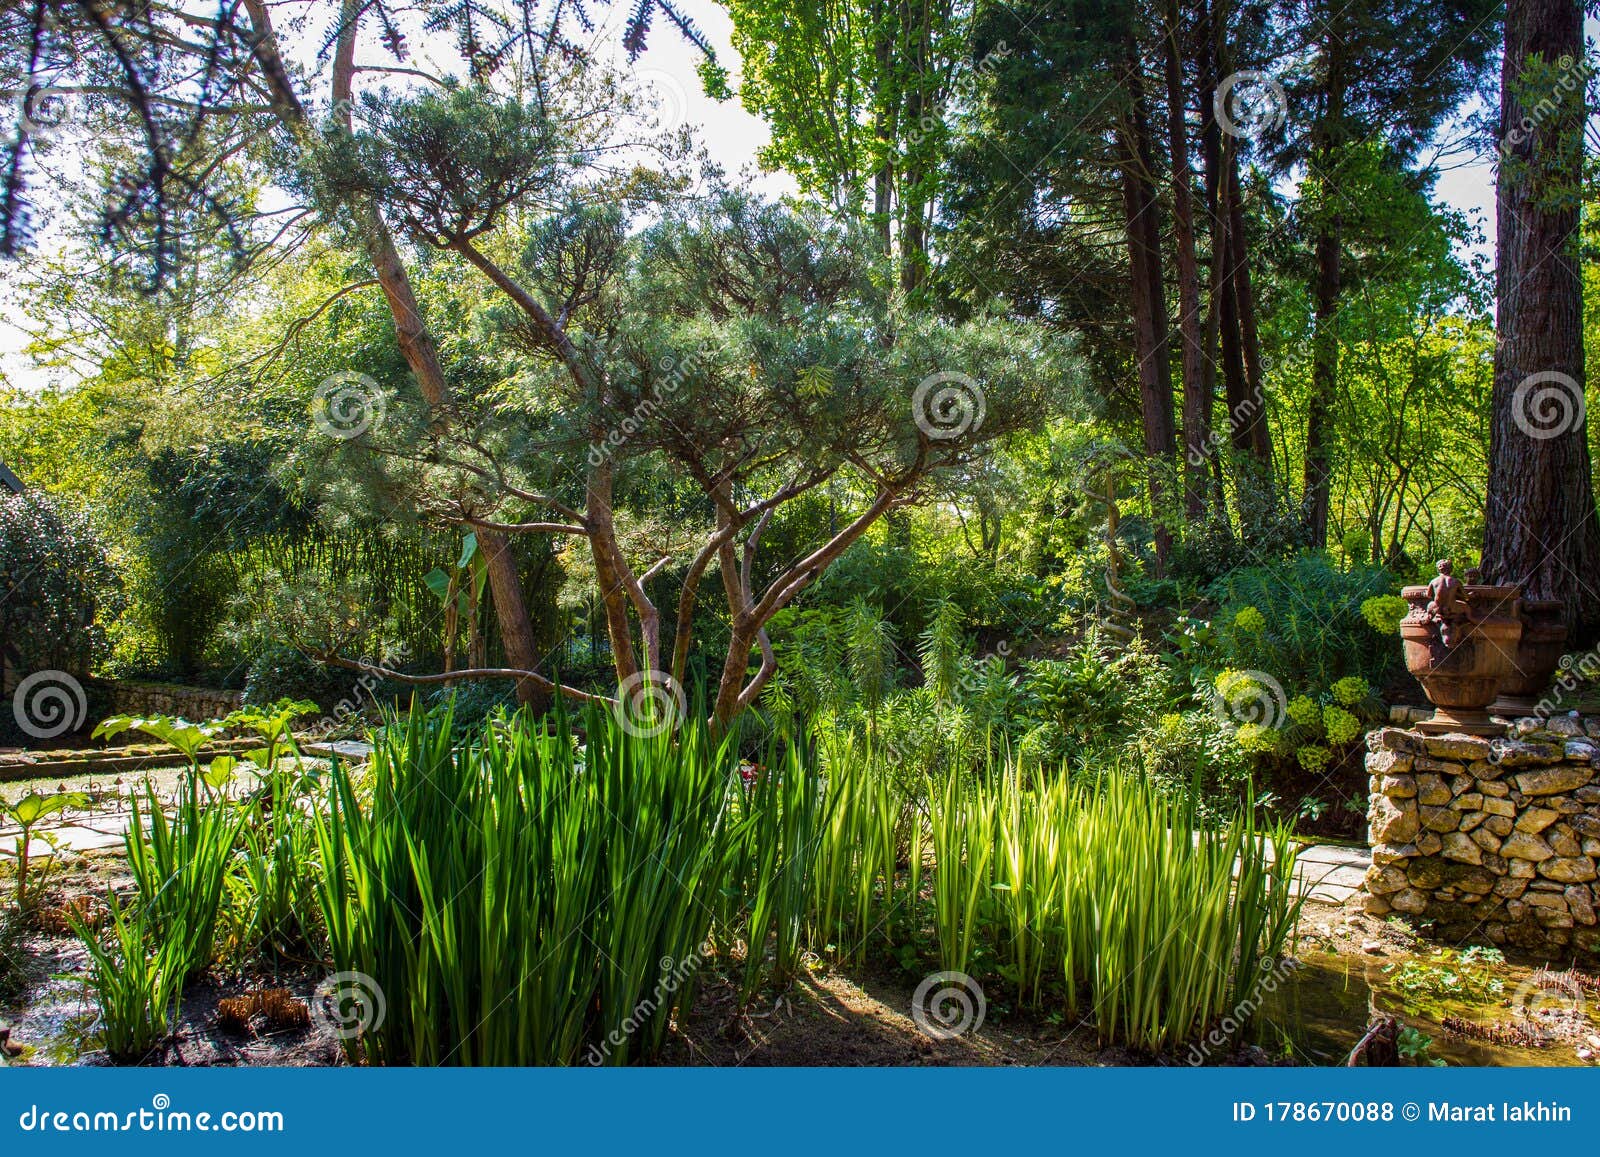 Fantastic in Garden Agapanthe Le Jardin Agapanthe in Normandy Stock Photo - of france, pool: 178670088